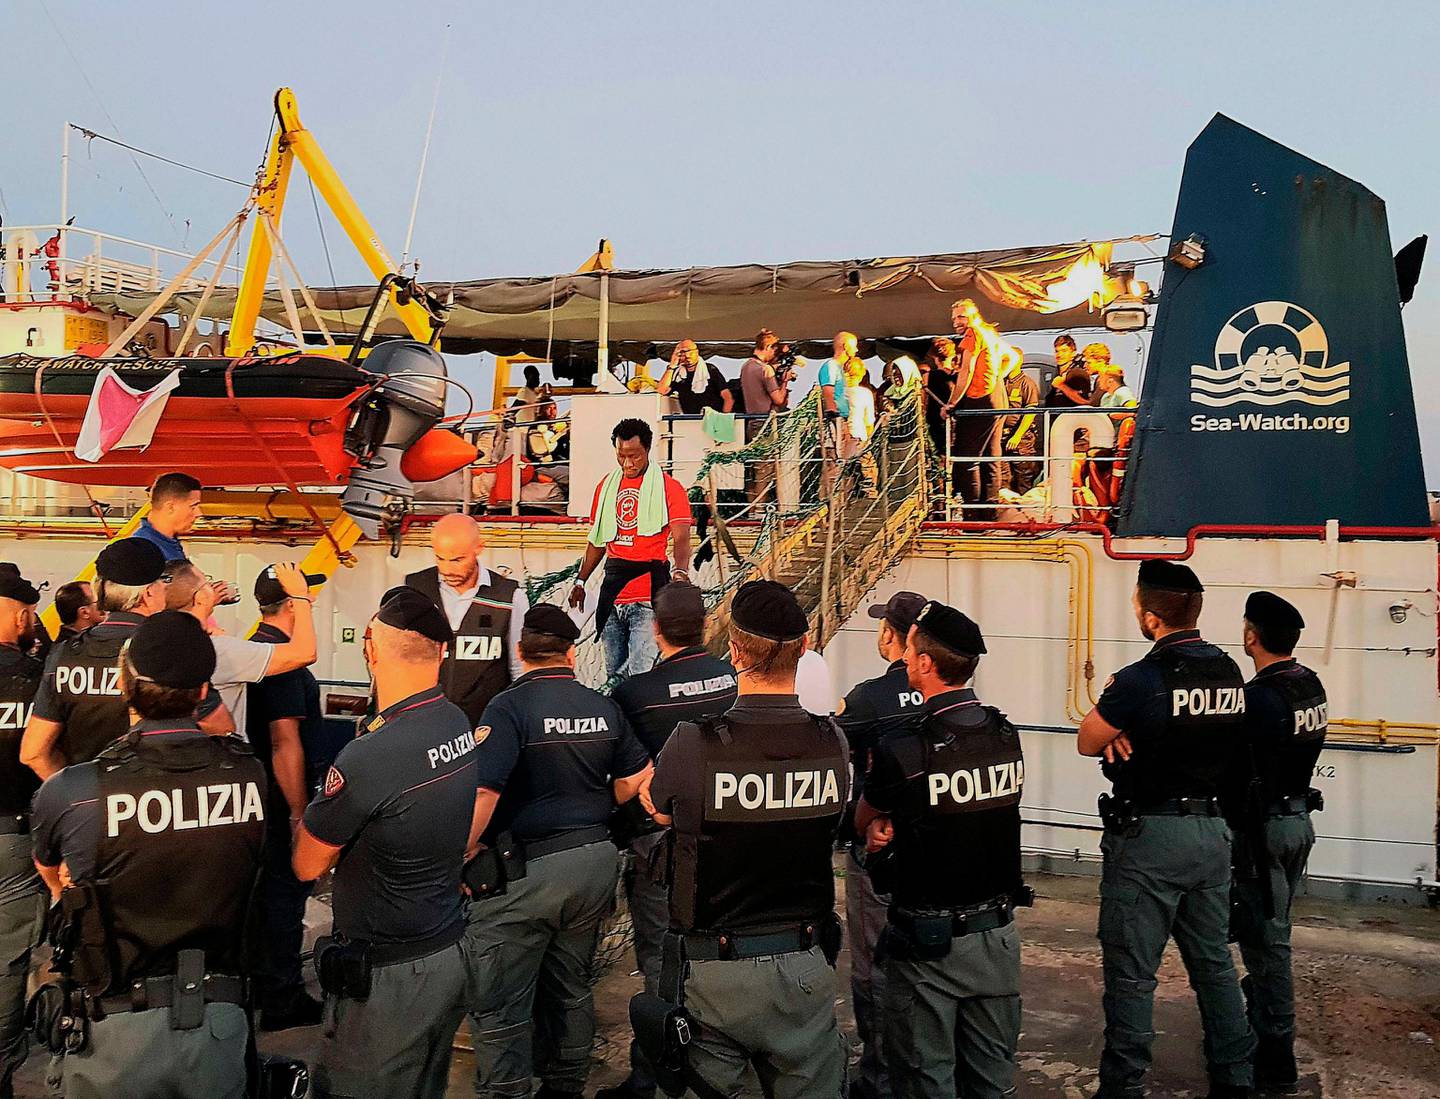 Migrants disembark from the Ducth-flagged Sea-Watch 3 ship, at Lampedusa island's harbor, Italy, Saturday, June 29, 2019. Forty migrants have disembarked on a tiny Italian island after the captain of the German aid ship which rescued them docked without permission. Sea-Watch 3 rammed an Italian border police motorboat as it steered toward the pier on Lampedusa. (Elio Desiderio/ANSA via AP)